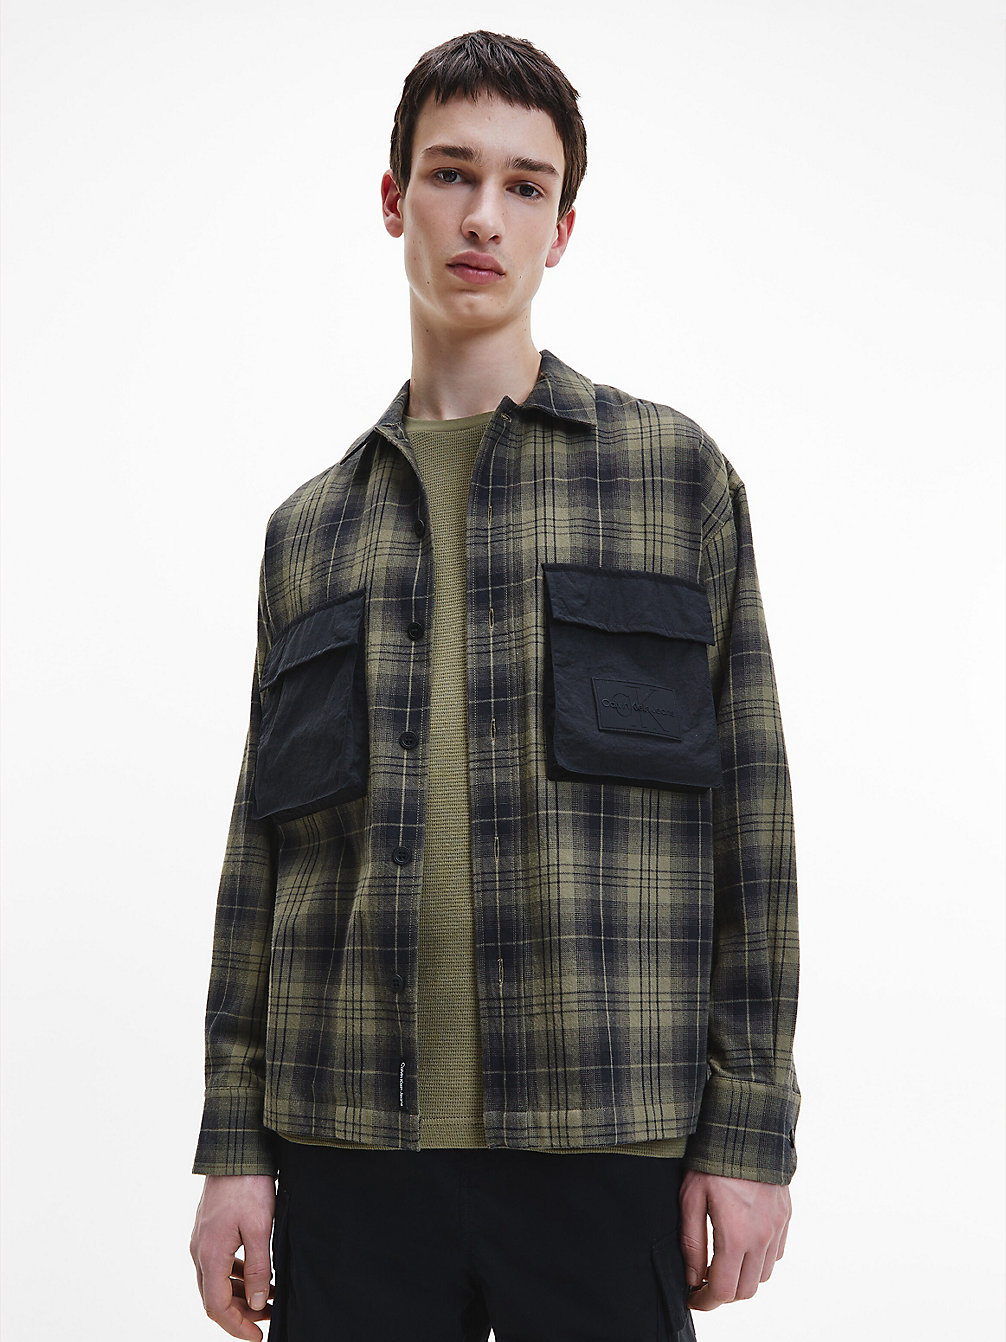 BURNT OLIVE/CK BLACK Relaxed Cotton Twill Check Shirt undefined men Calvin Klein